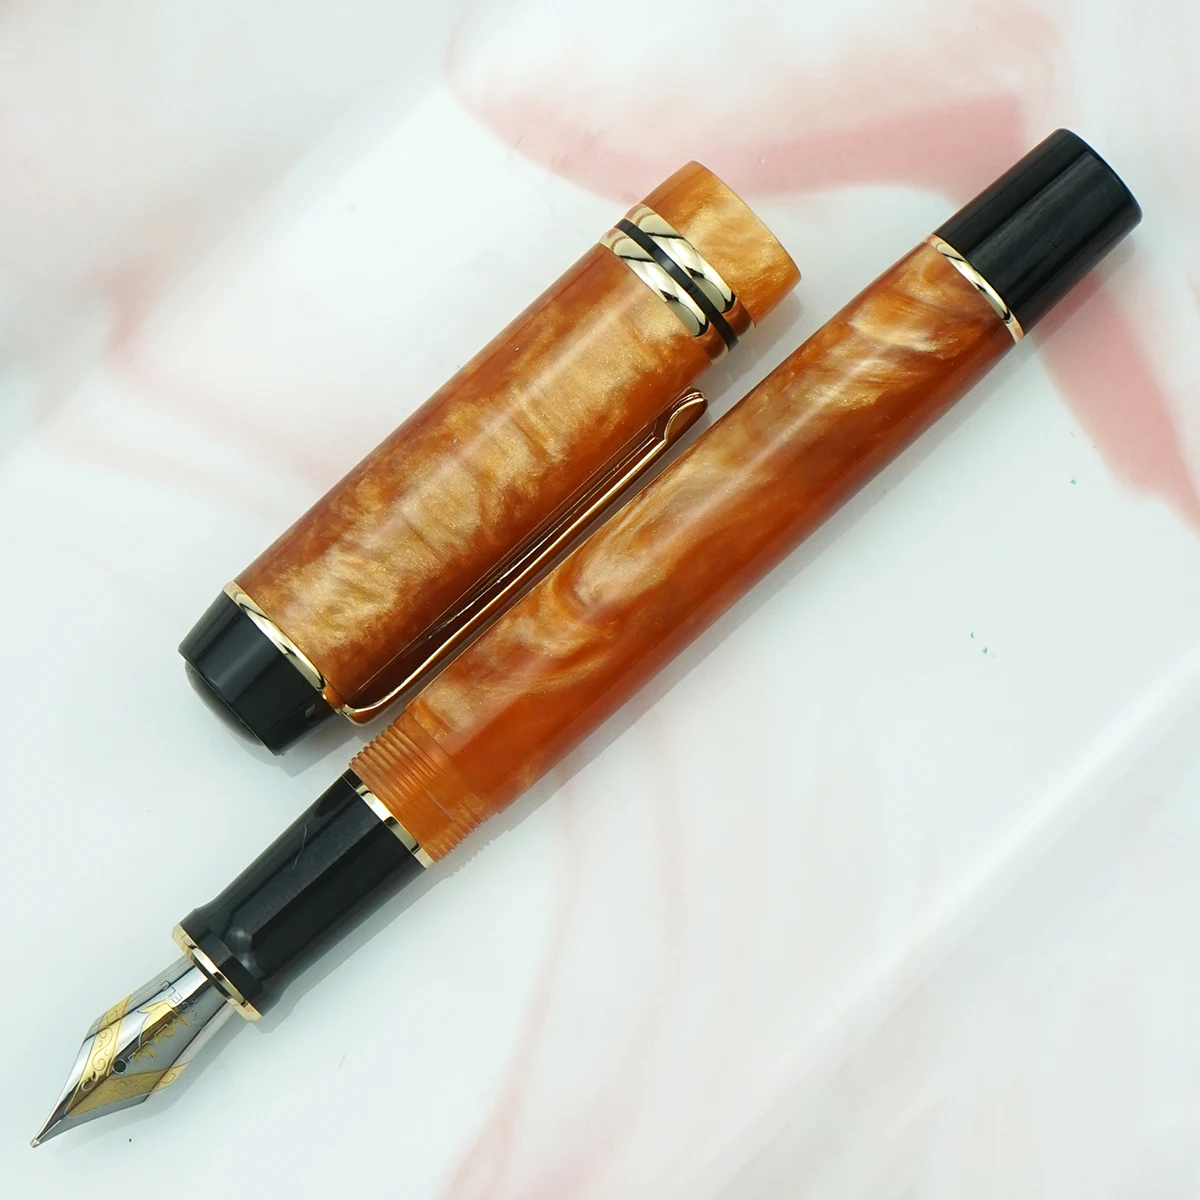 Kaigelu 316 Celluloid Fountain Pen, Beautiful Orange Color Iridium EF/F/M Nib Writing Ink Pen Office Business School Gift Pen new color kaigelu 316 fountain pen f nibbeautiful office of the original colours of writing out of print rose gold ink pen gift